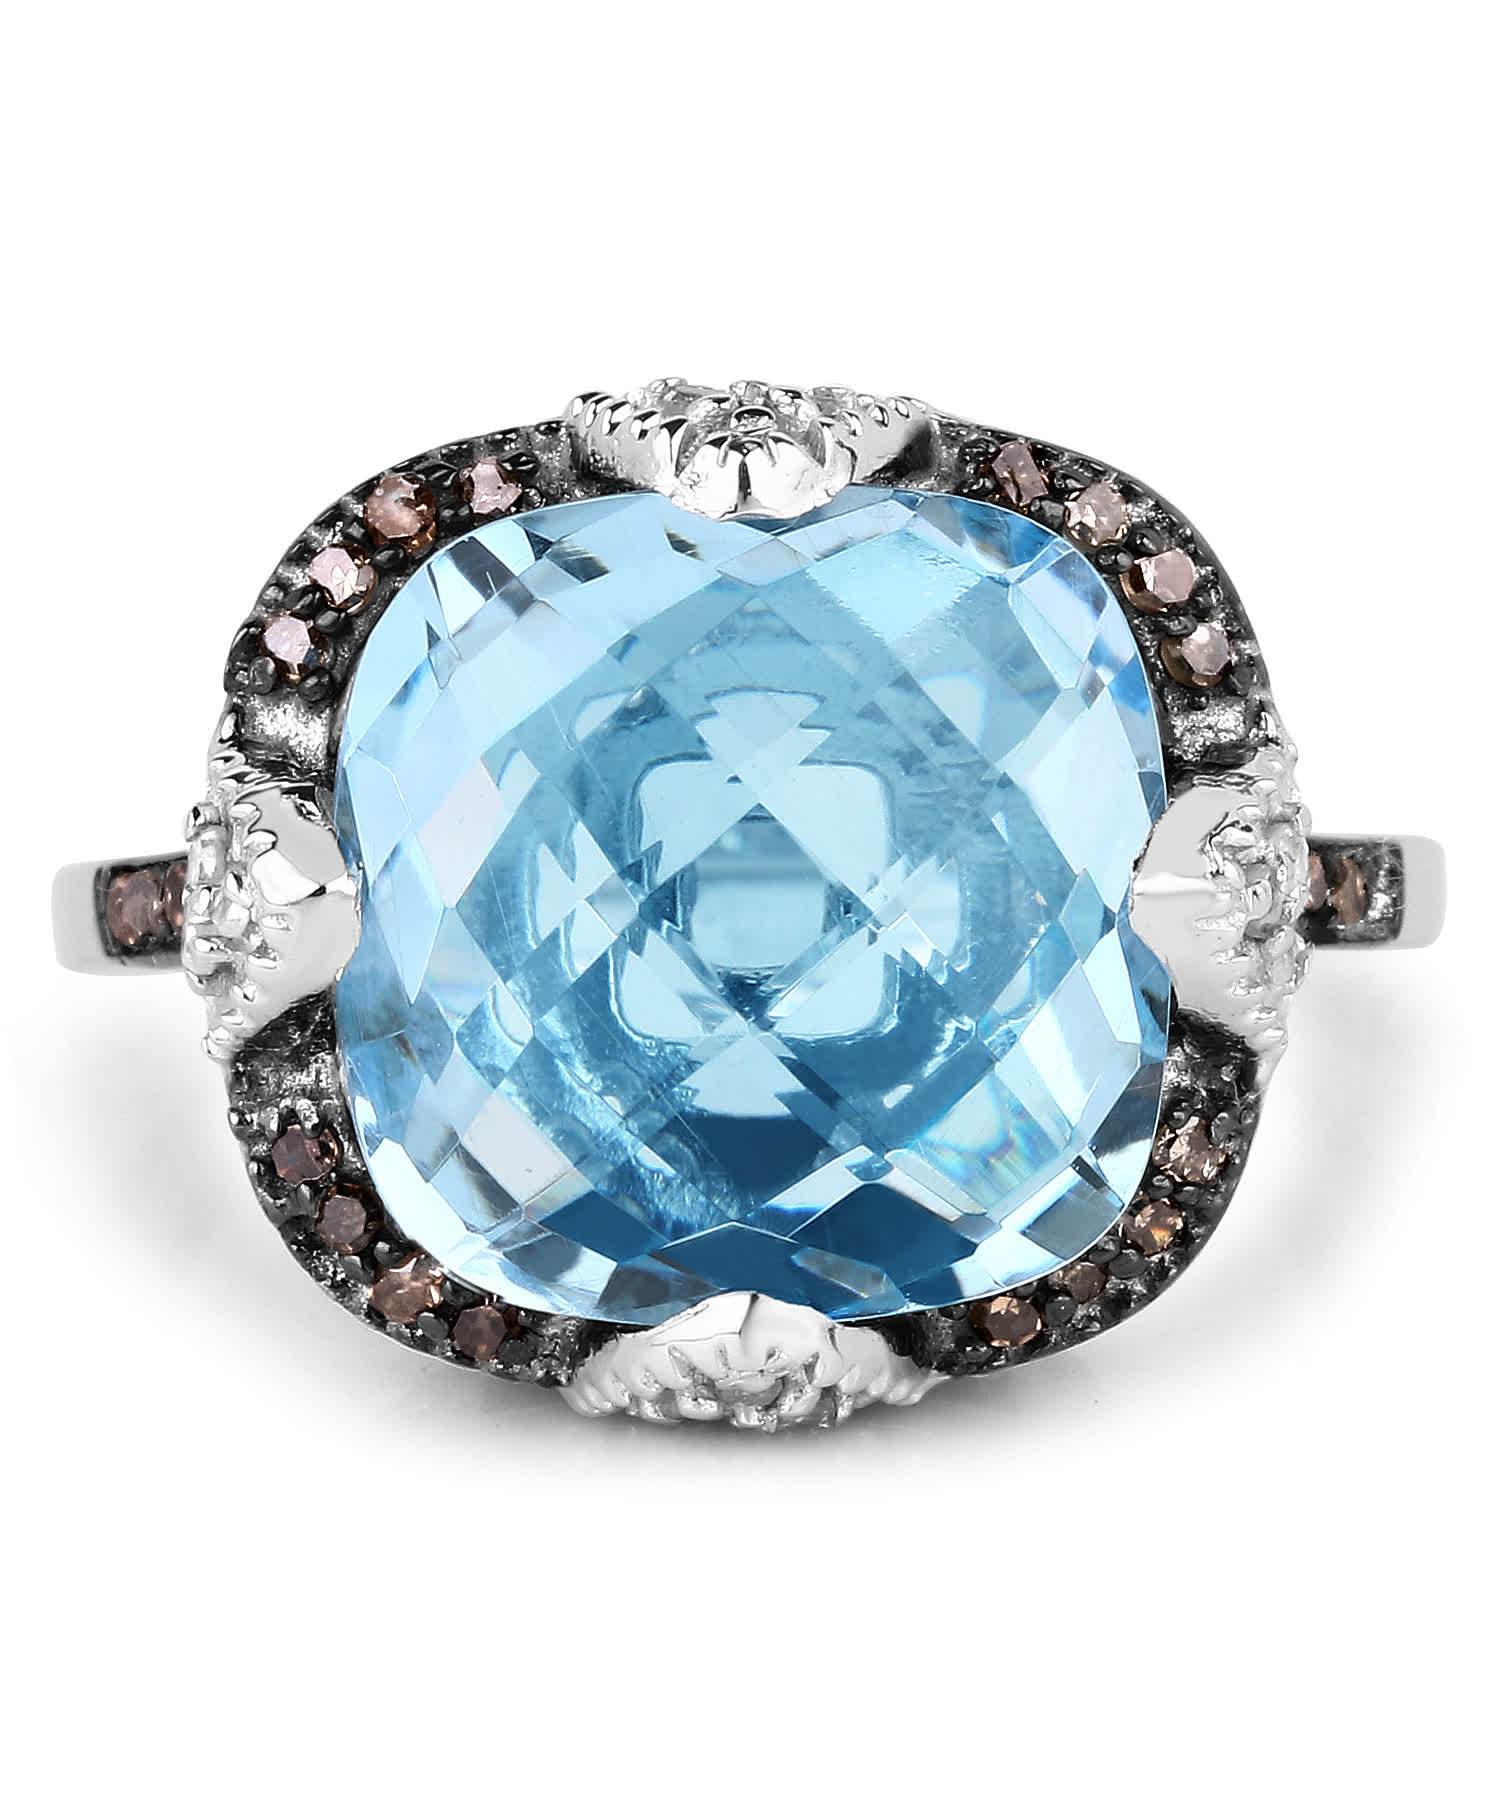 8.30ctw Natural Swiss Blue Topaz and Champagne Diamond Rhodium Plated 925 Sterling Silver Cocktail Ring View 3